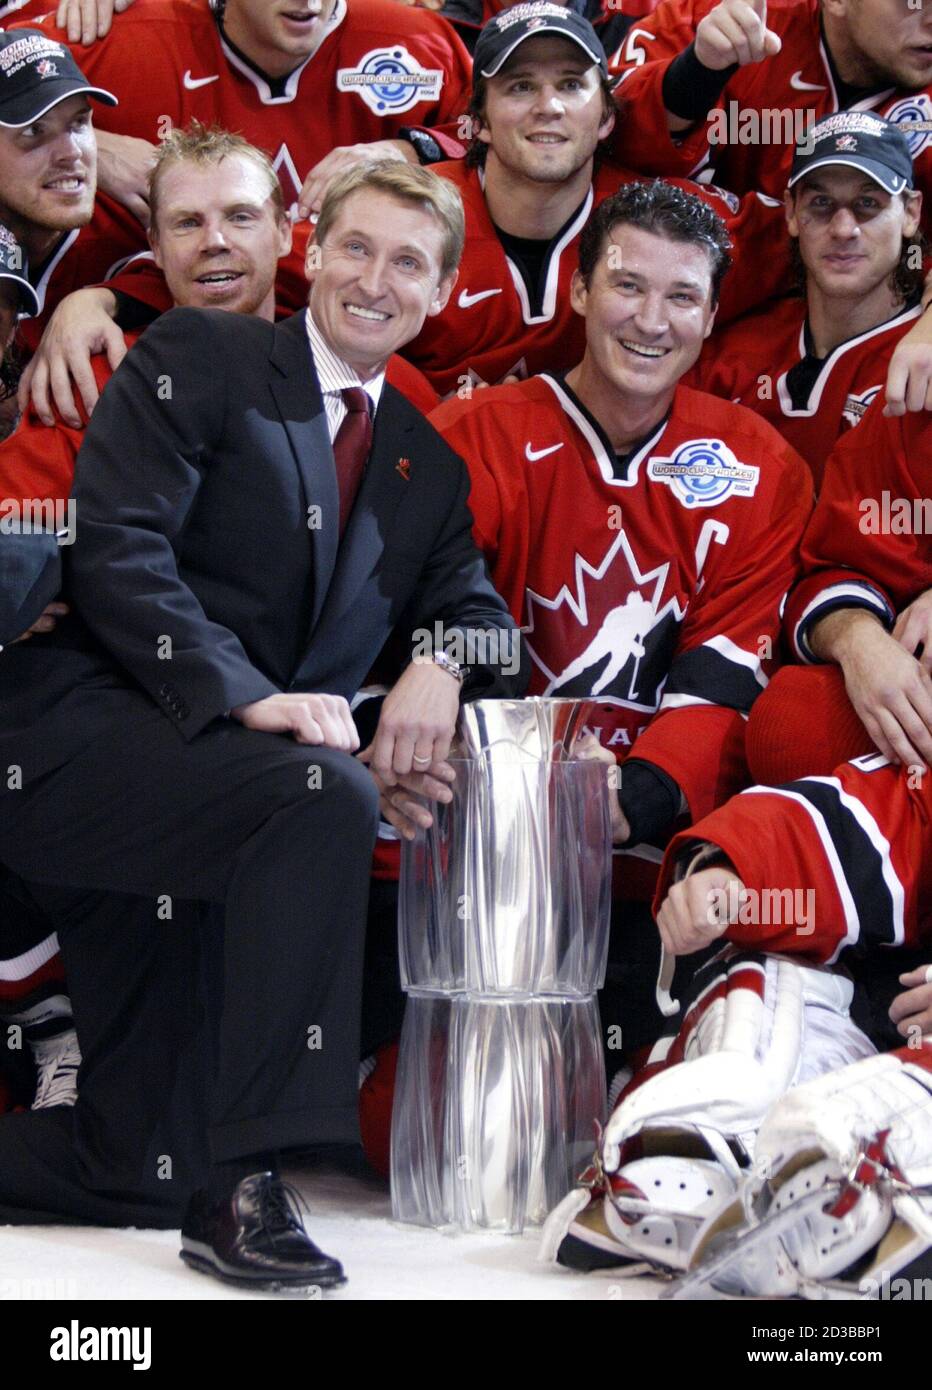 Team Canada executive director Wayne Gretzky and captain Mario Lemieux  celebrate with the team after defeating